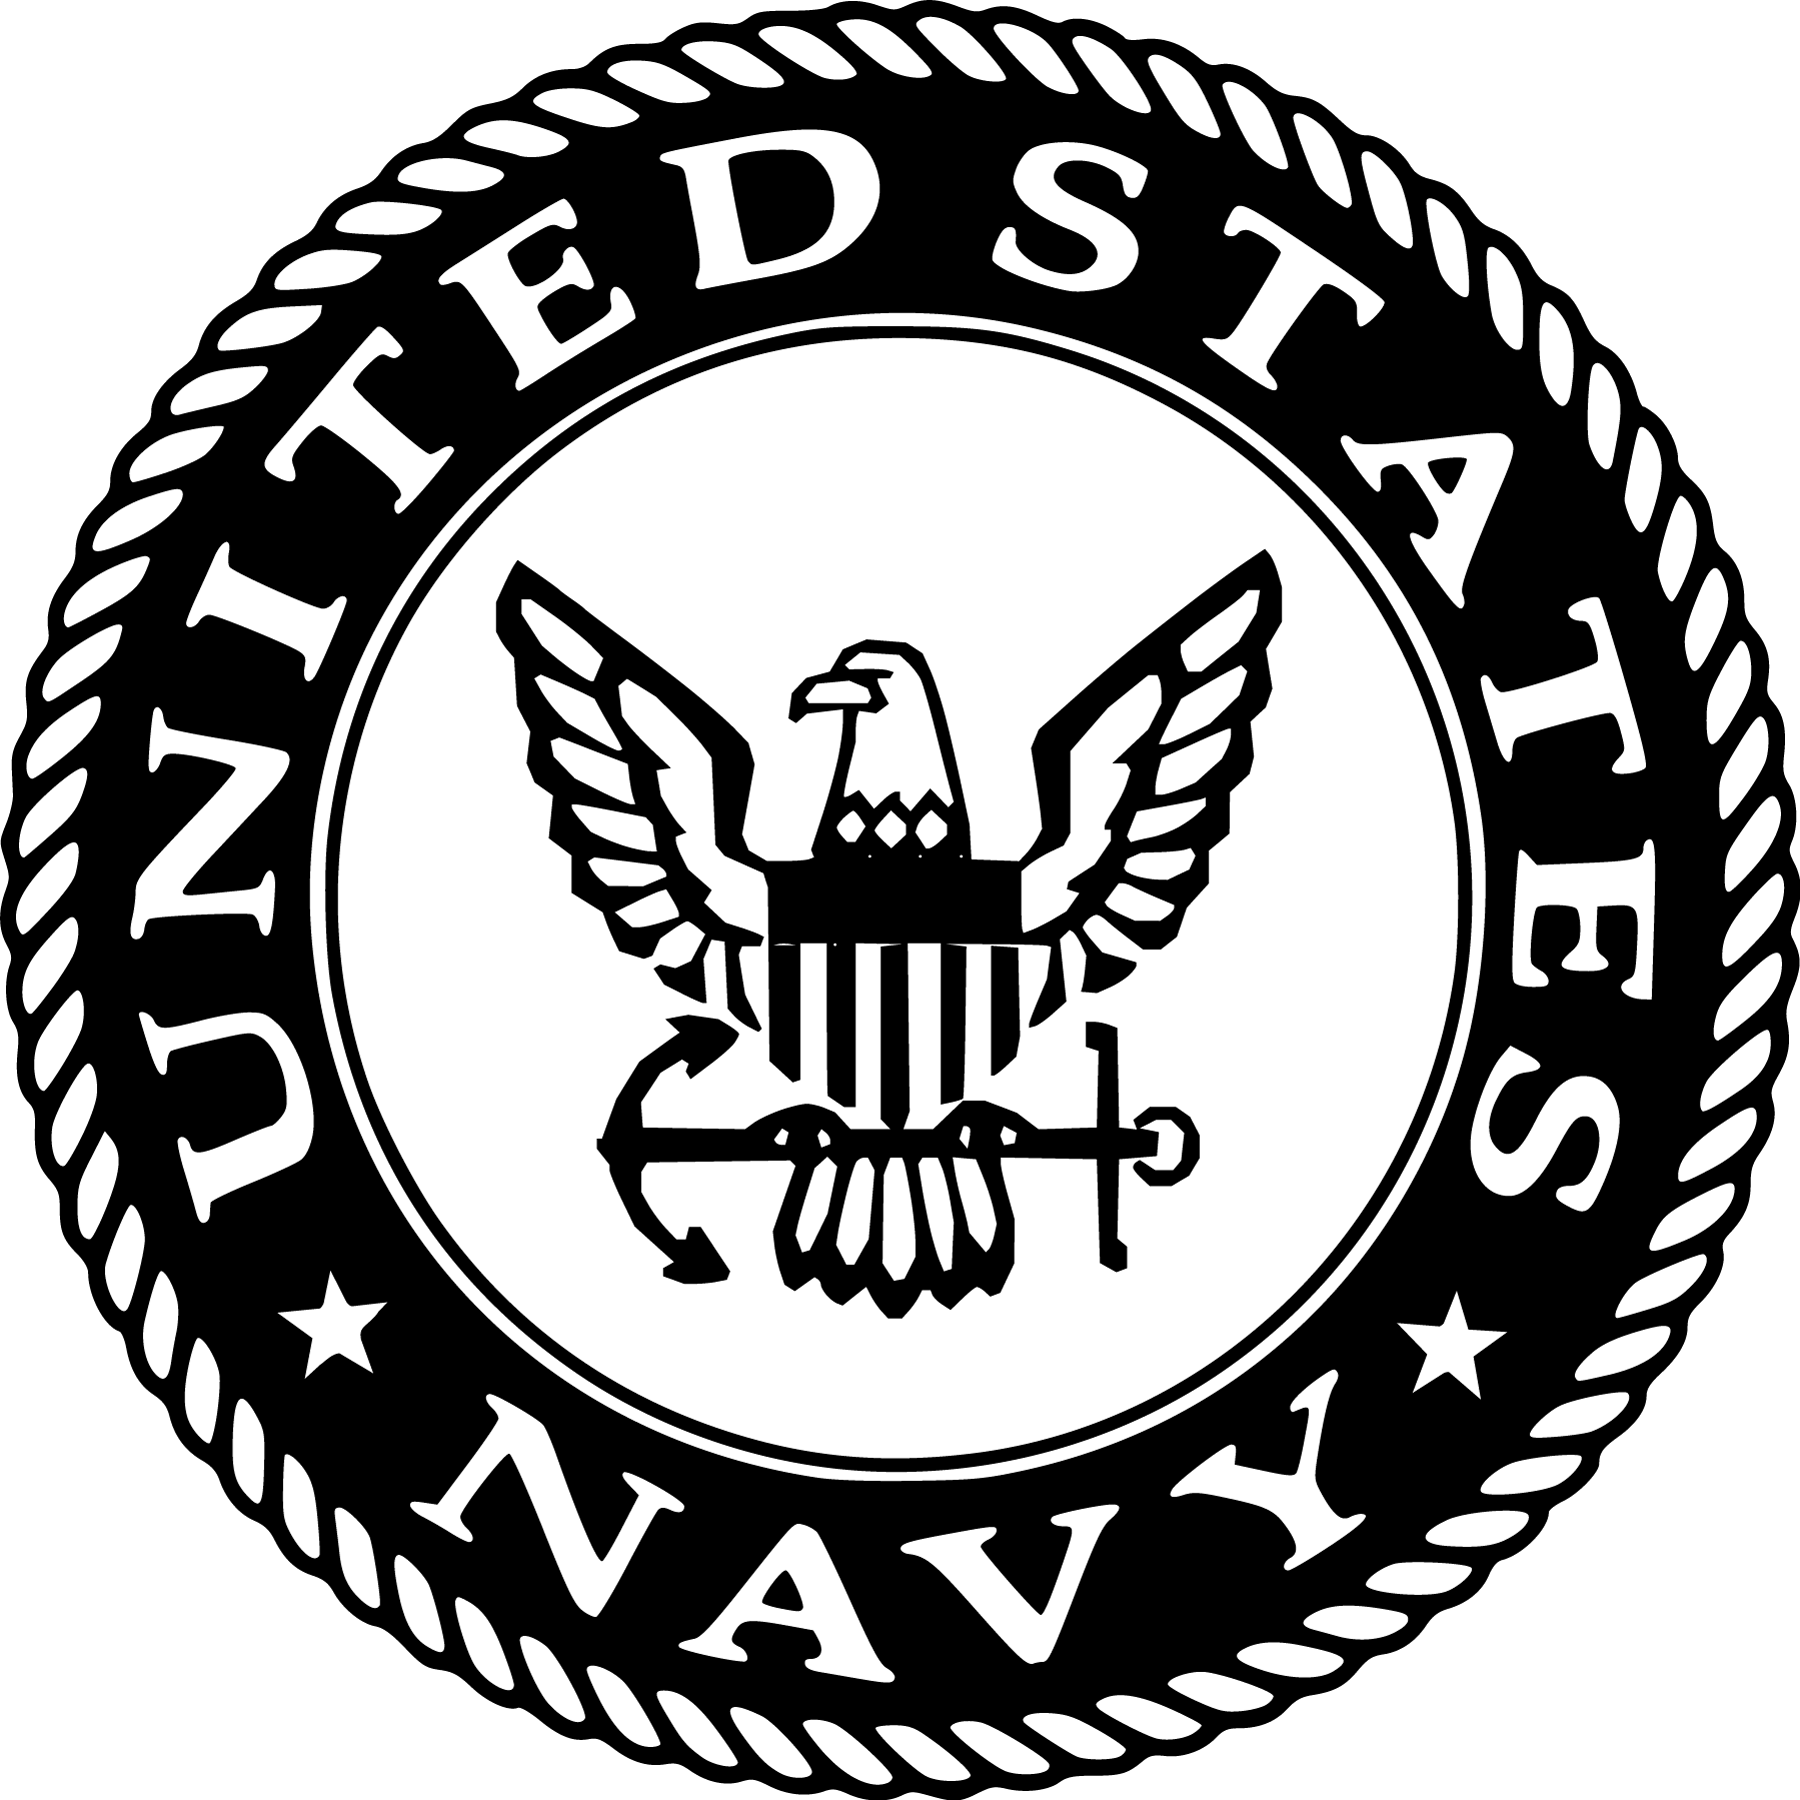 The United States Navy Usn Is